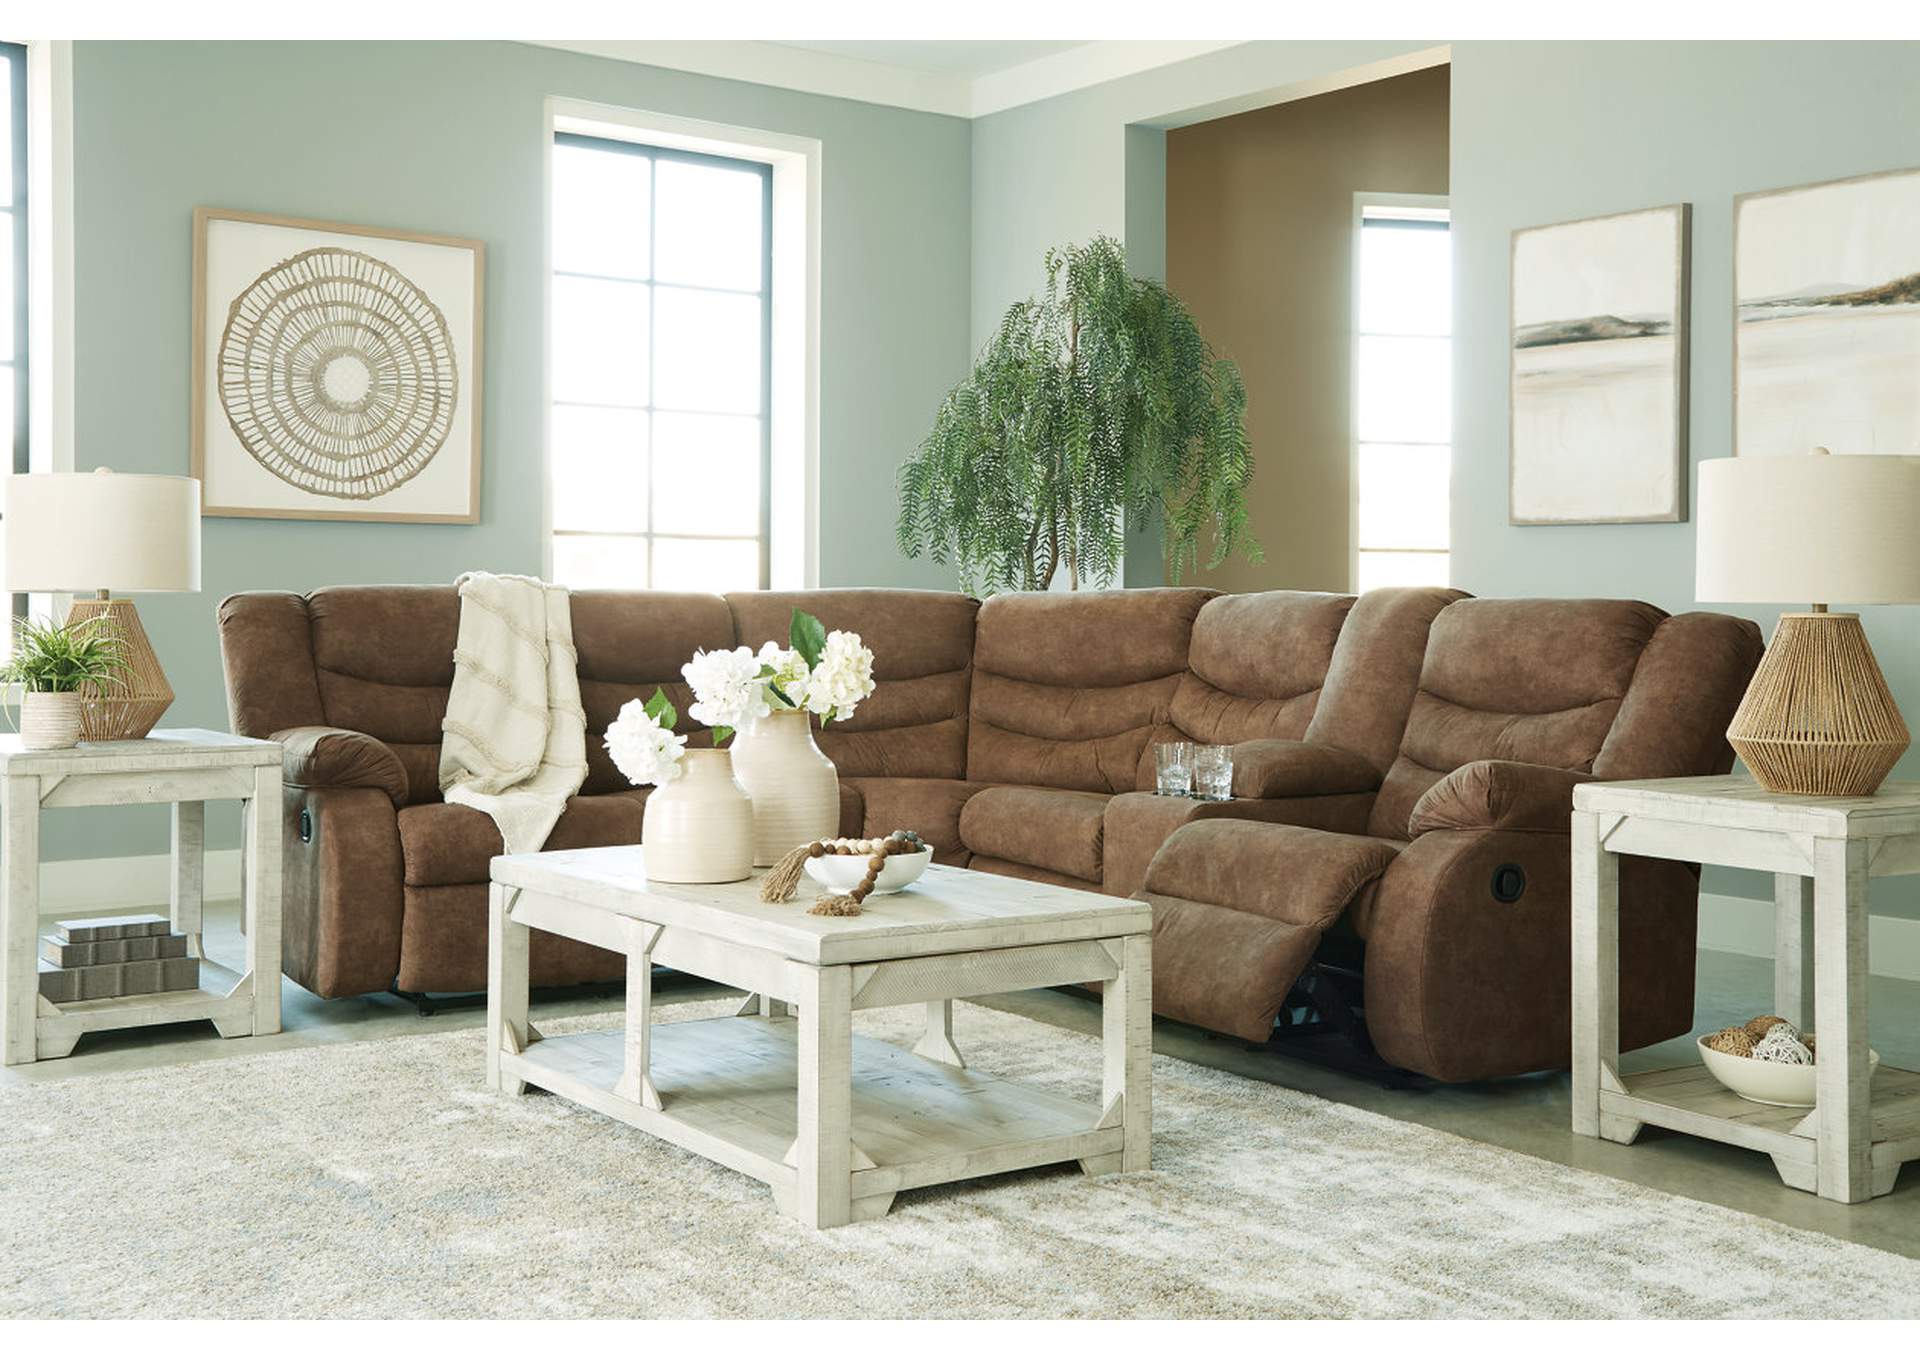 Partymate 2-Piece Reclining Sectional,Signature Design By Ashley